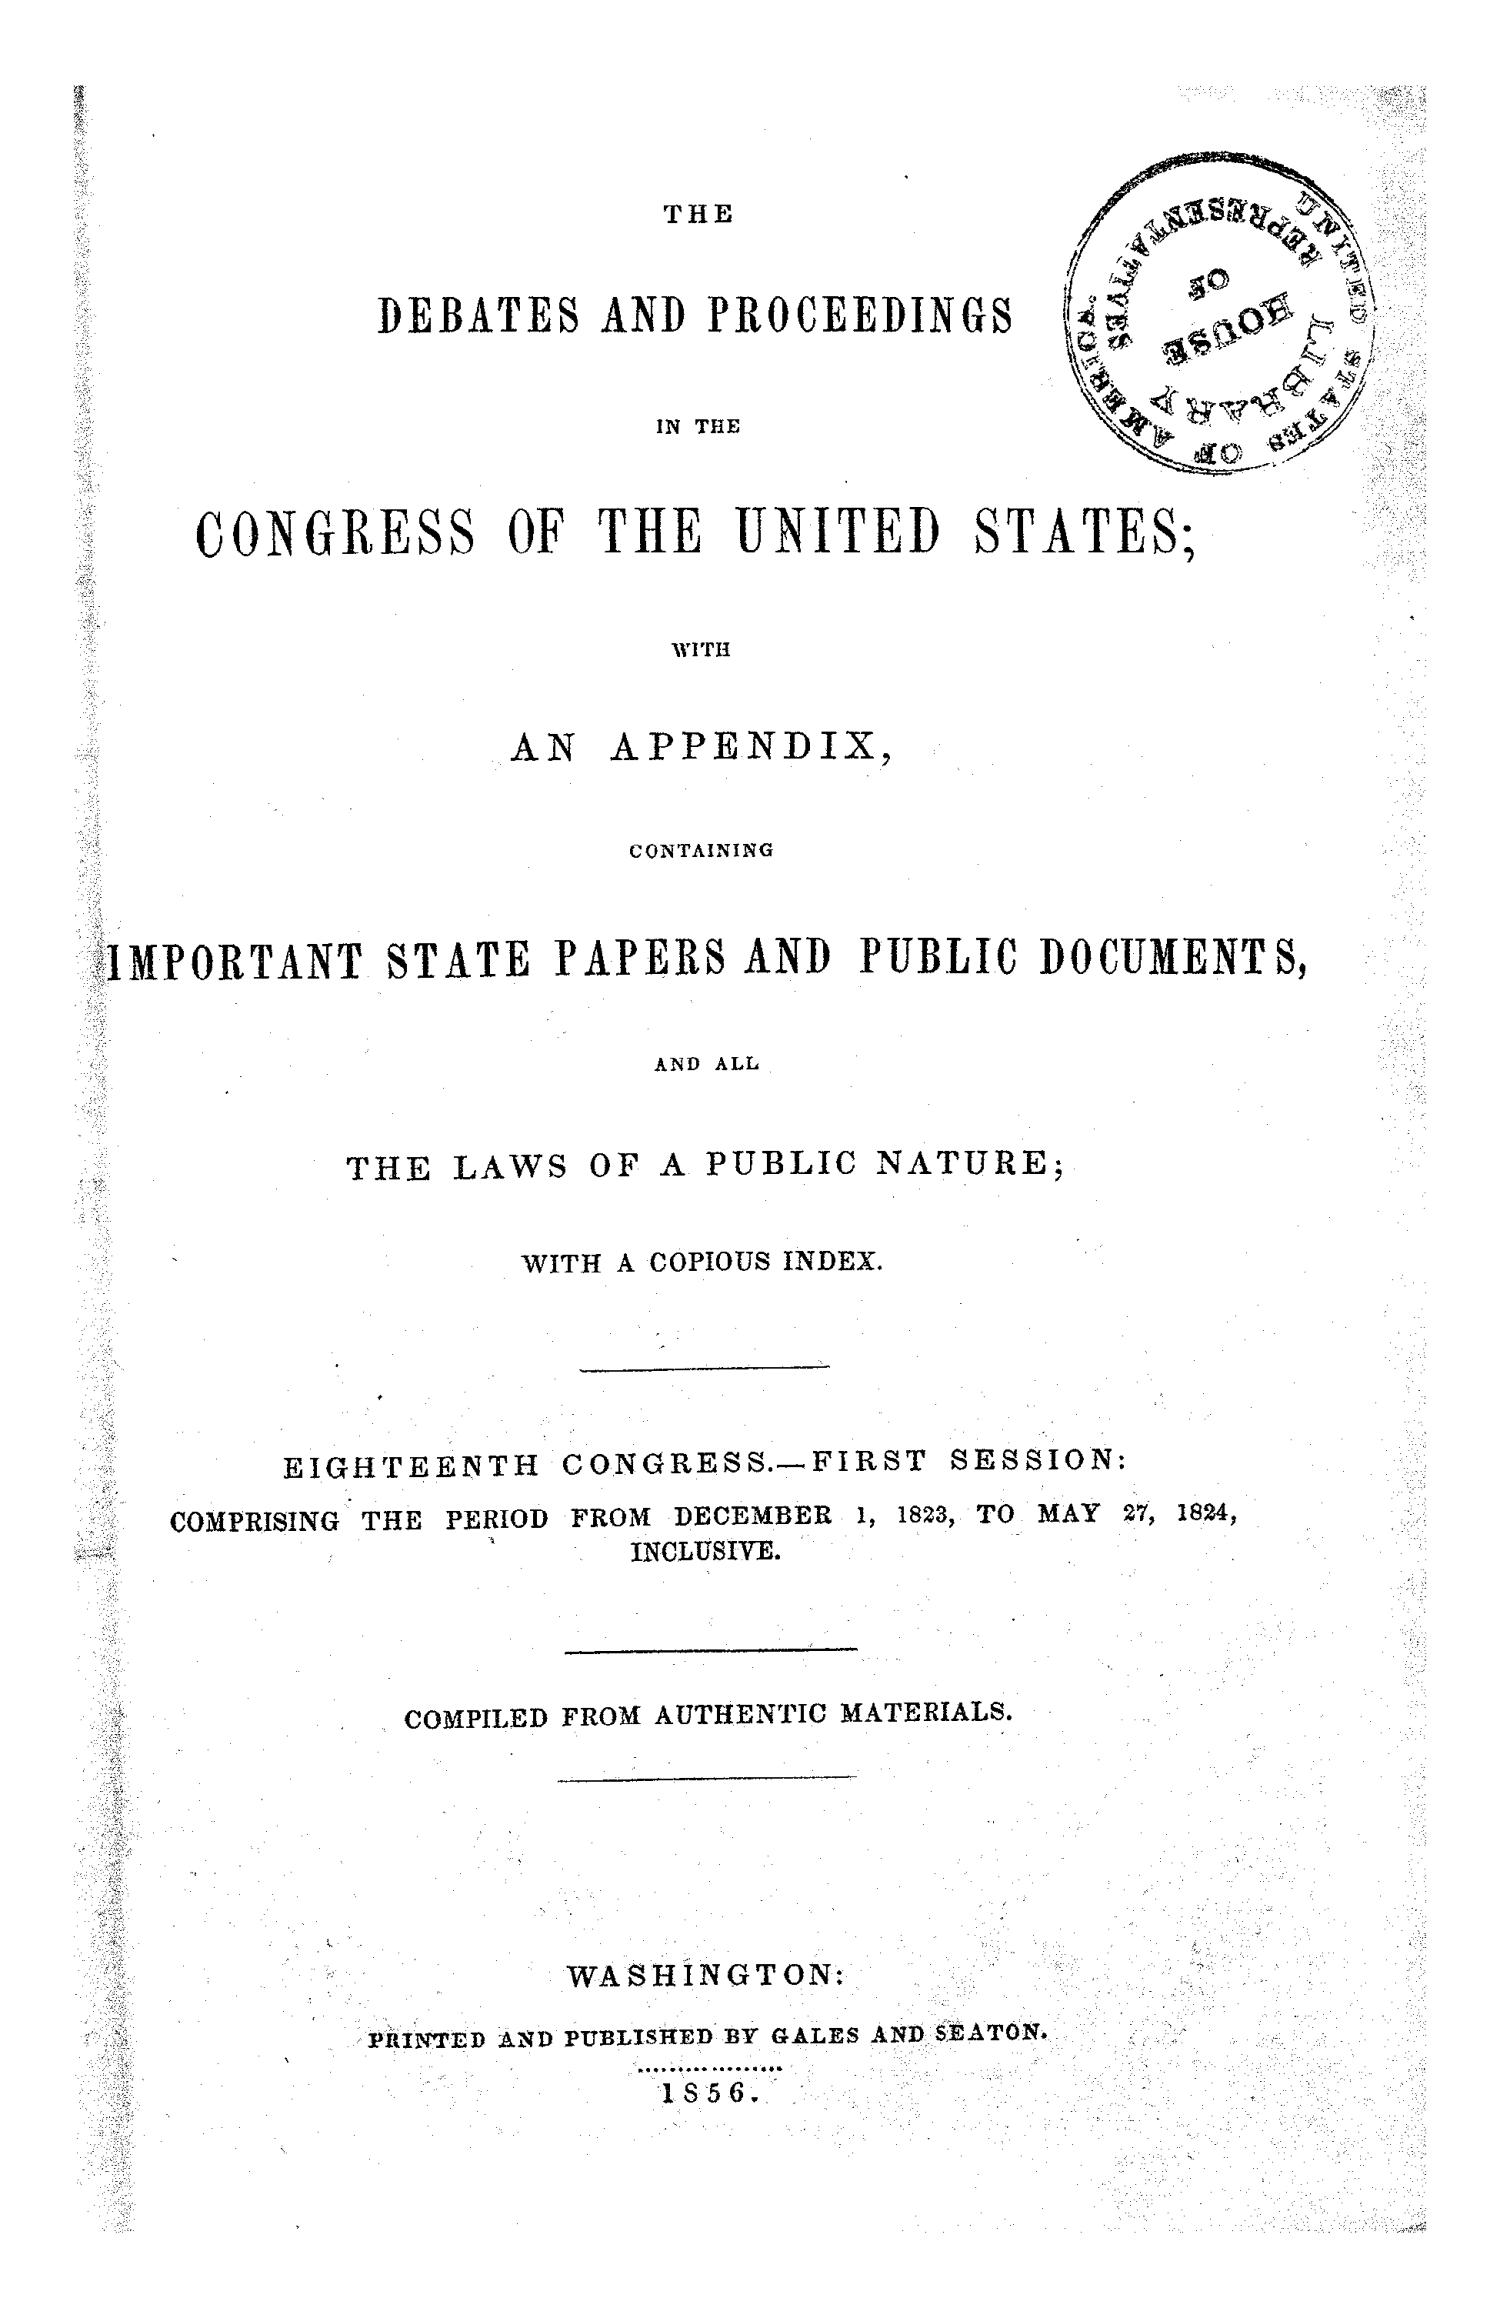 The Debates and Proceedings in the Congress of the United States, Eighteenth Congress, First Session, [Volume 2]
                                                
                                                    None
                                                